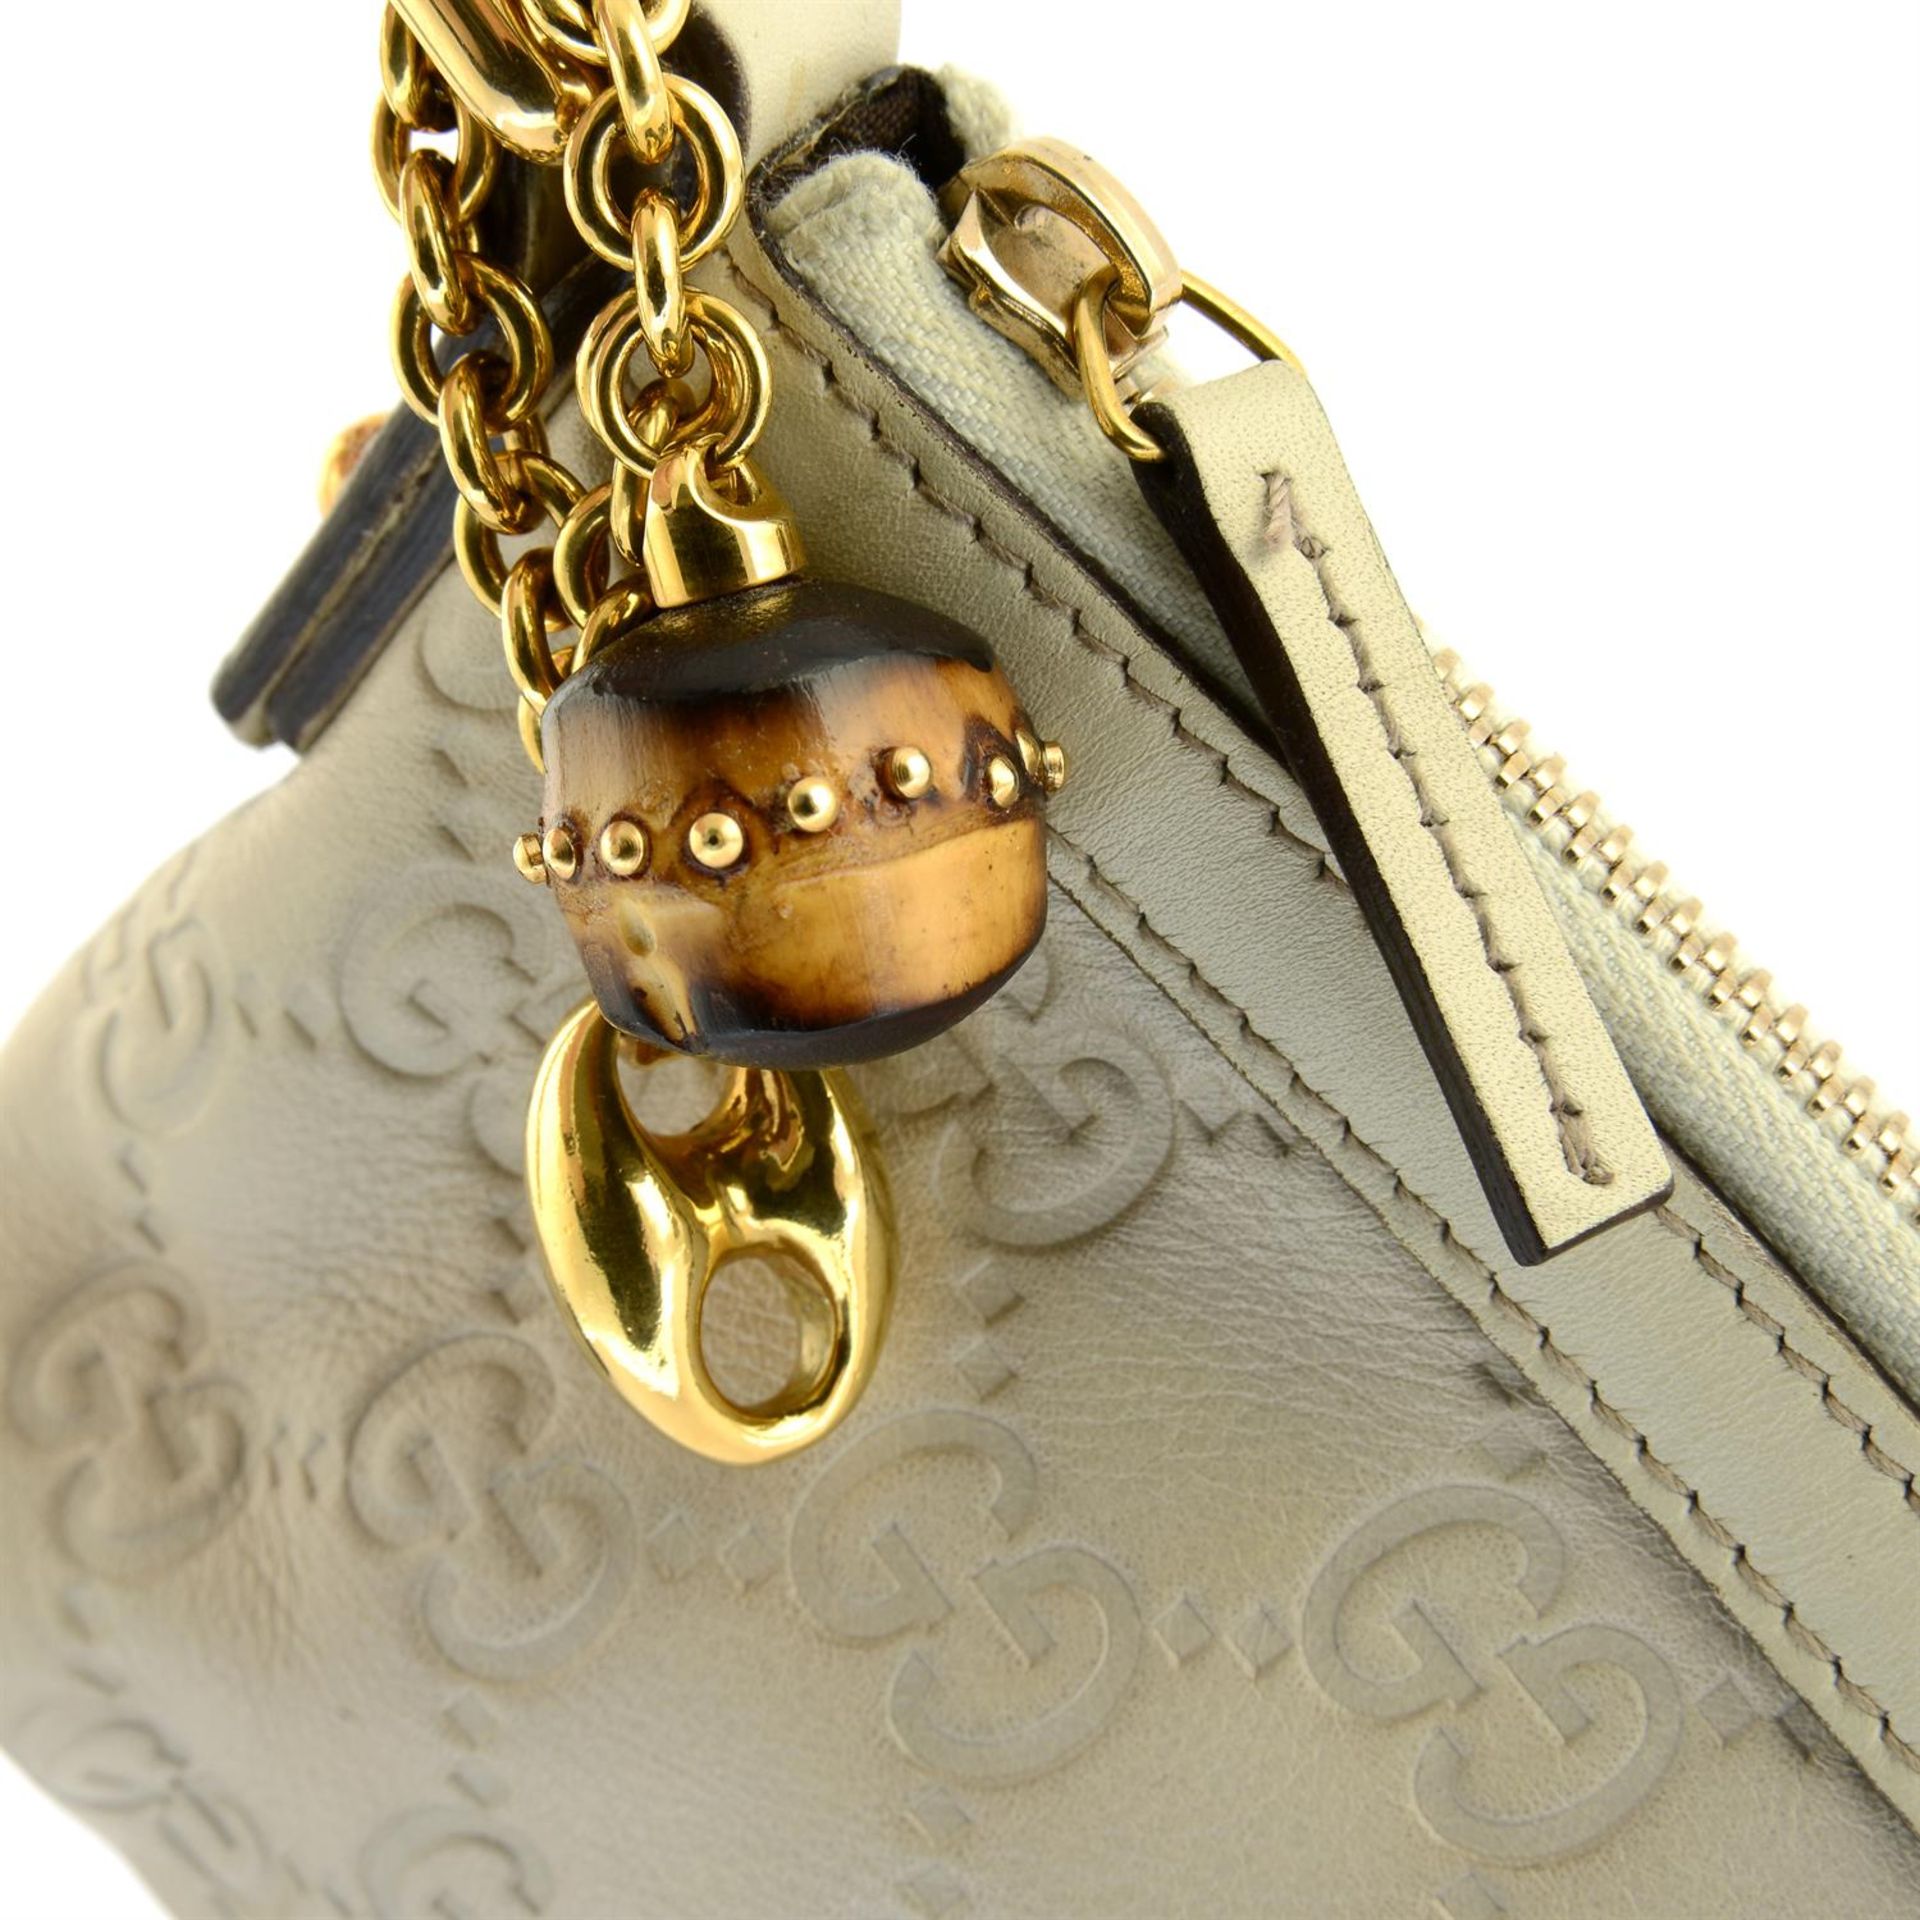 GUCCI - a beige leather Guccissima wristlet. - Image 3 of 3